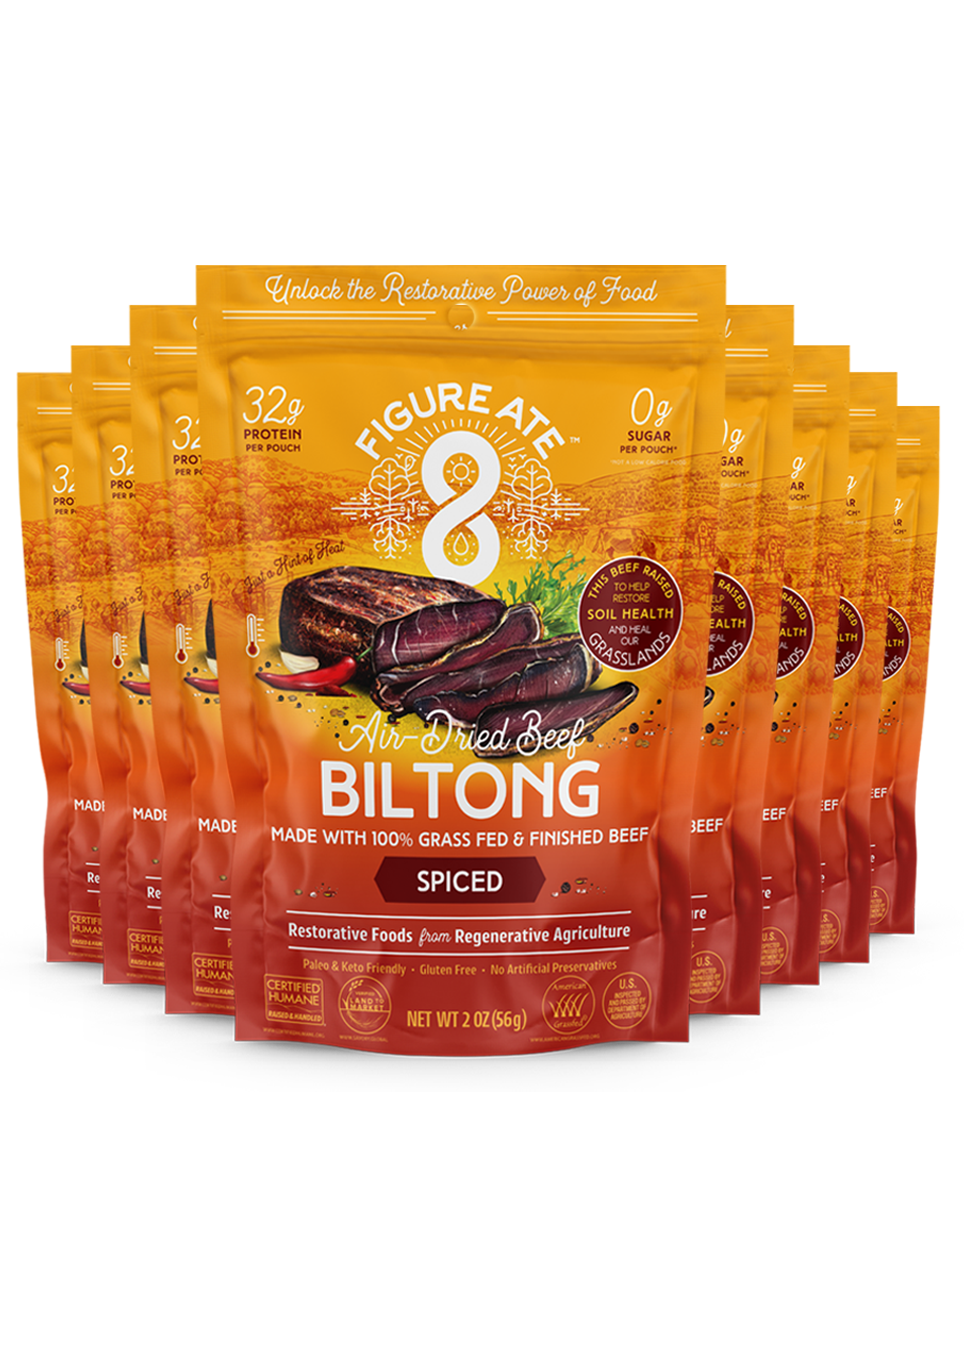 Spiced Grass Fed & Finished Beef Biltong